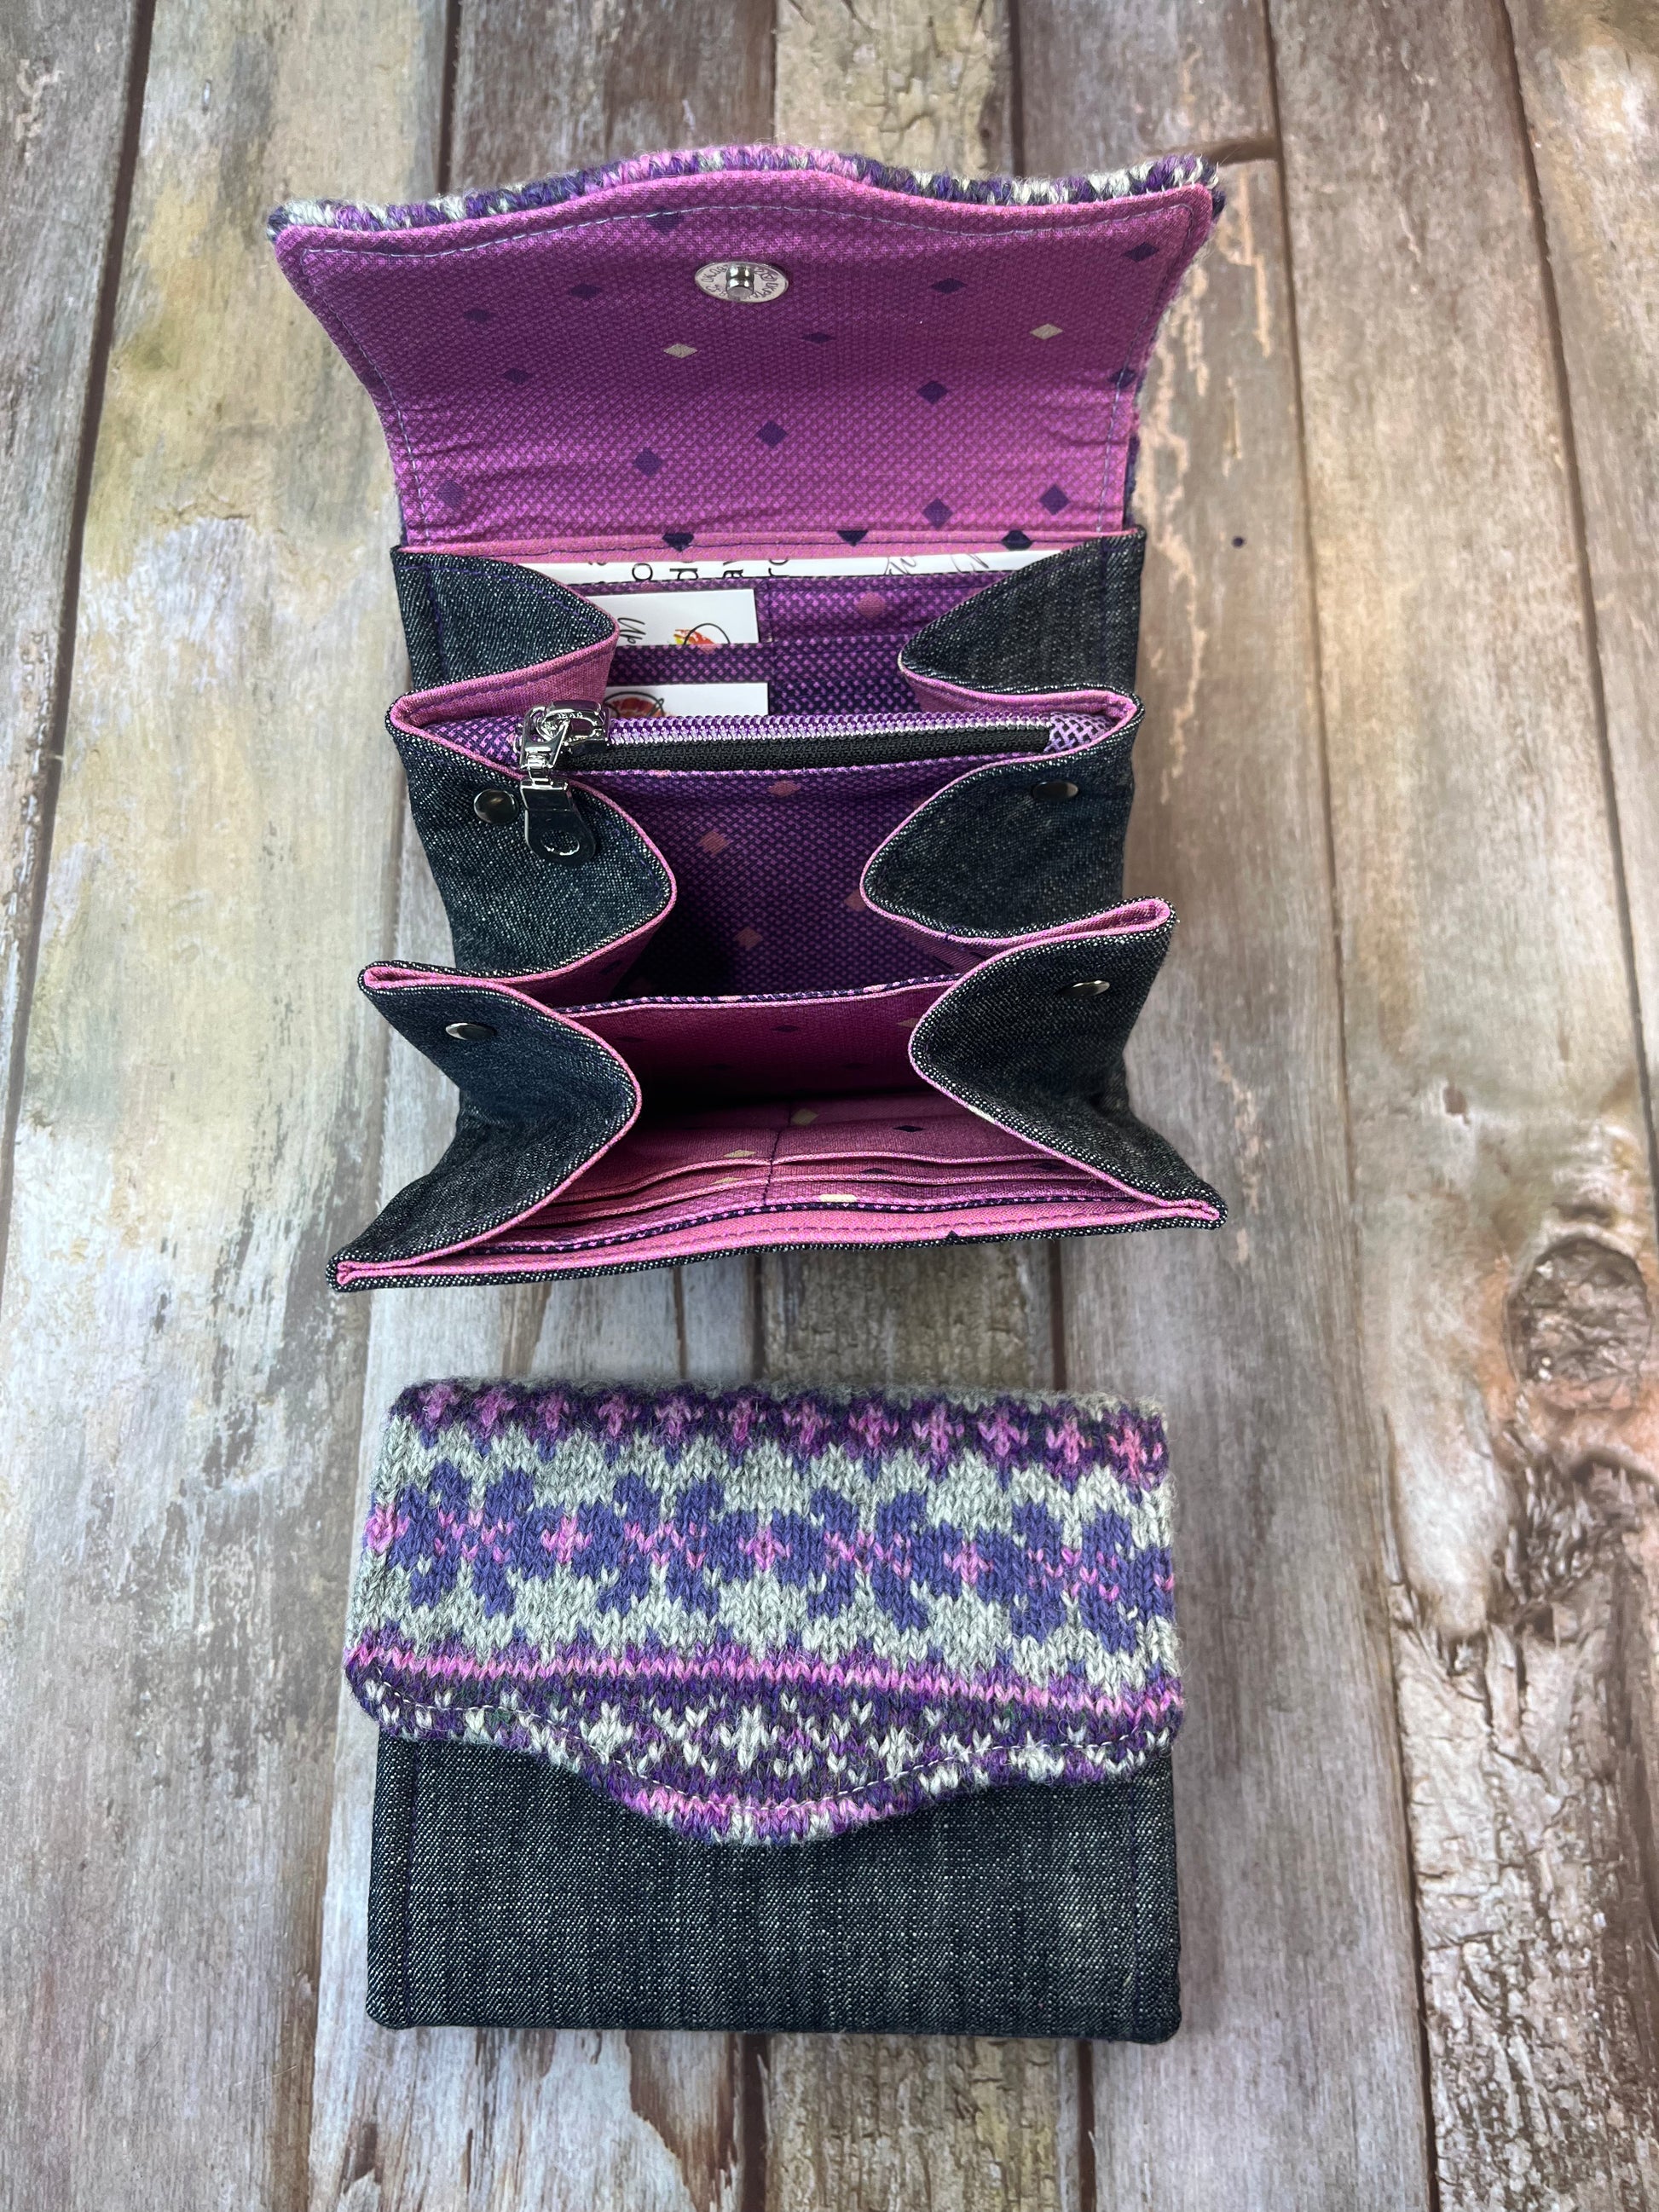 Hand knitted Fair Isle Purse Clutch - Purple Grey - Uphouse Crafts